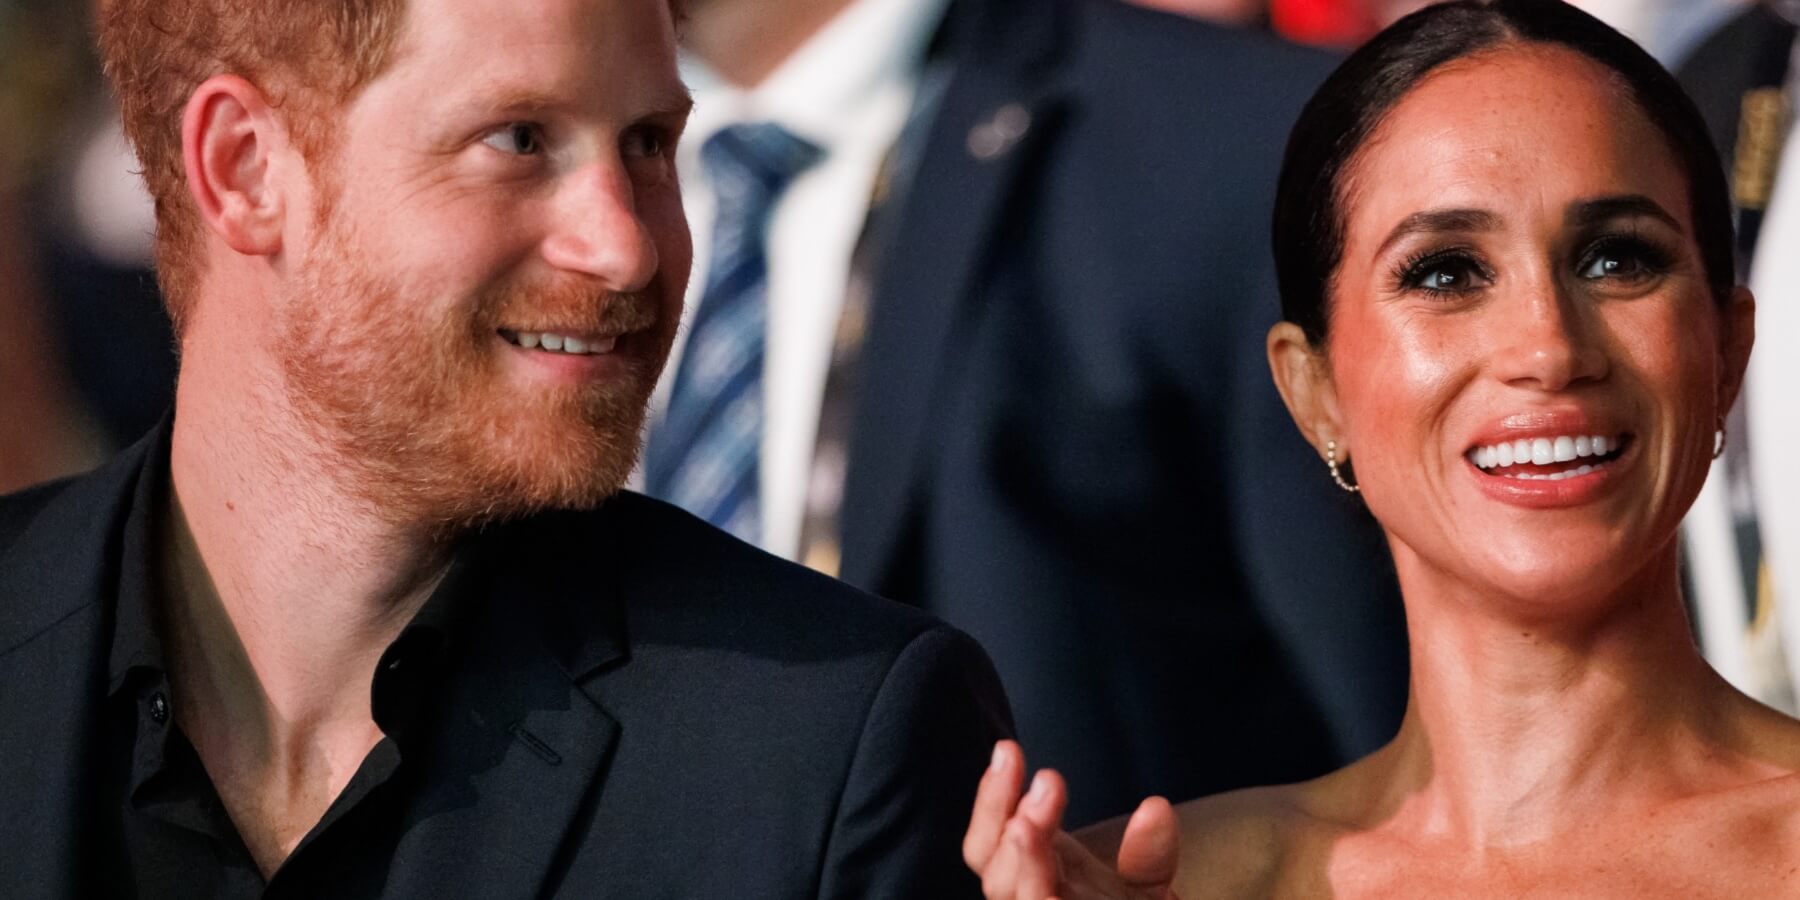 Prince Harry and Meghan Markle have unveiled a new website